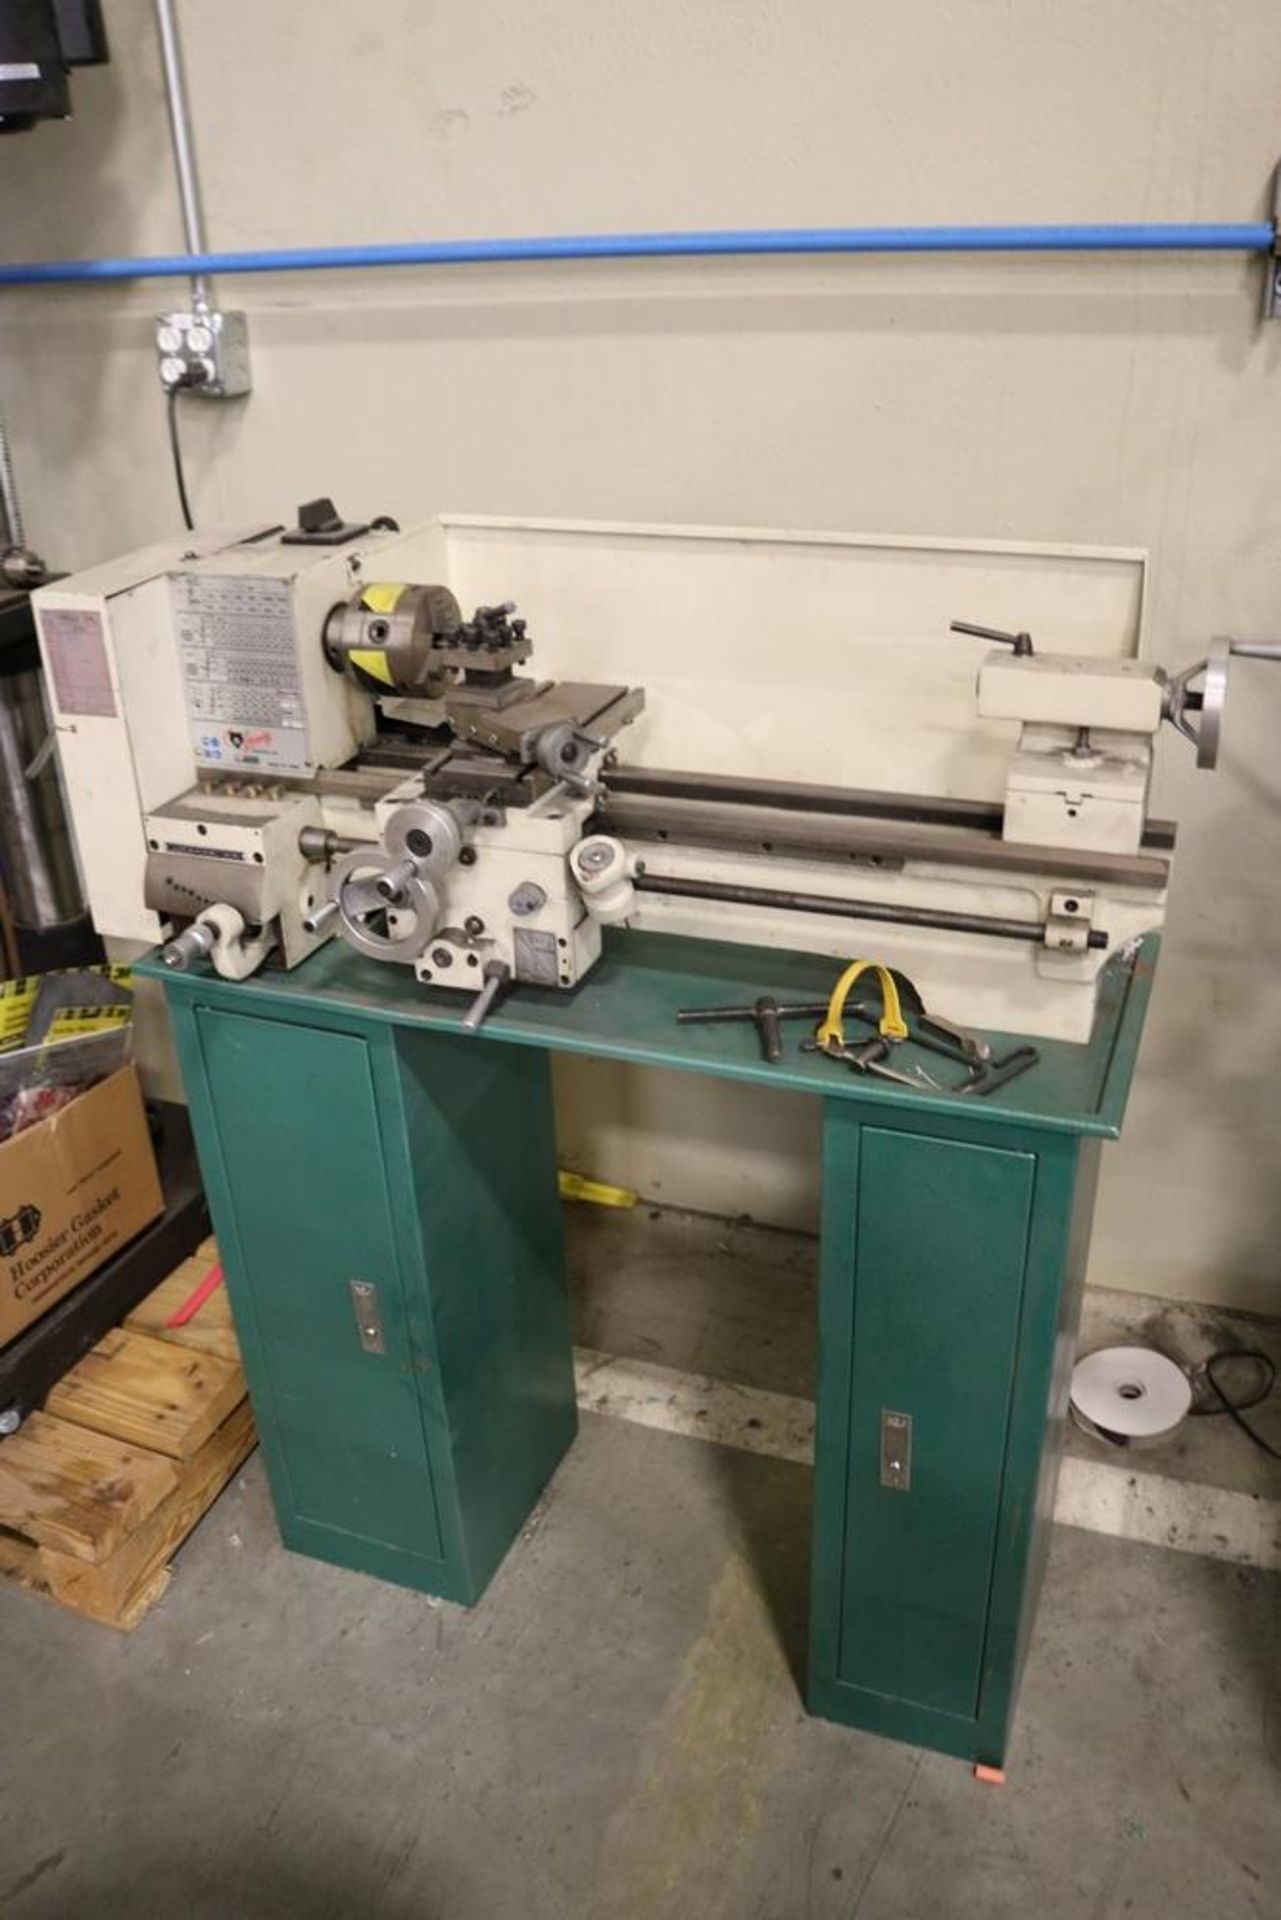 Grizzly Industrial G4000 9" x 19" Bench Lathe on Stand, 3 Jaw & 4Jaw Chuck & Others - Image 7 of 7